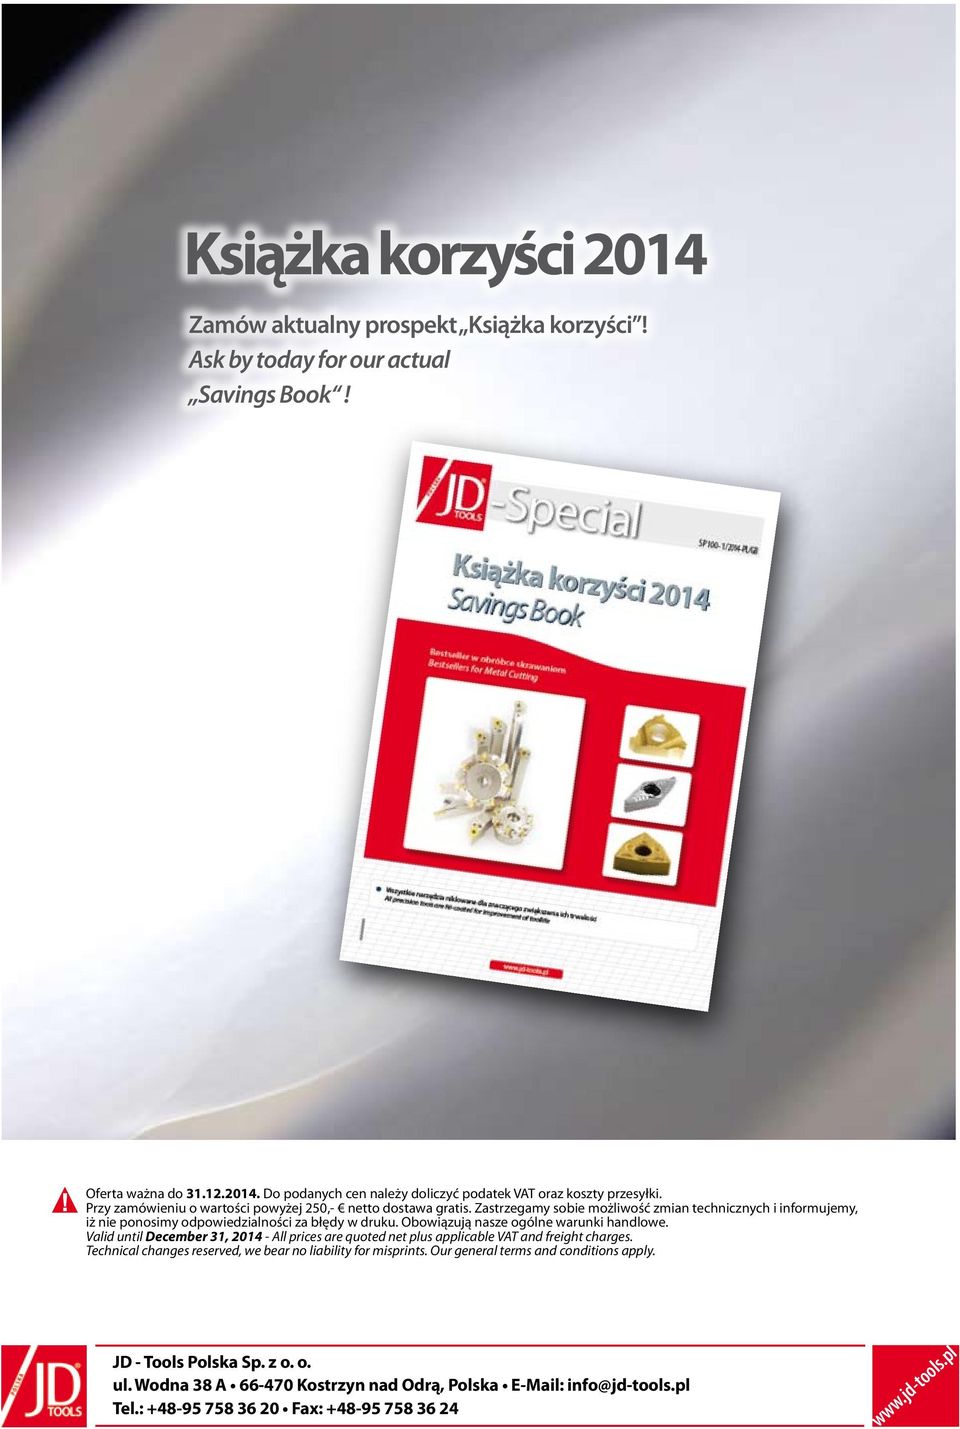 Obowiązują nasze ogólne warunki handlowe. Valid until December 31, 2014 - All prices are quoted net plus applicable VAT and freight charges.